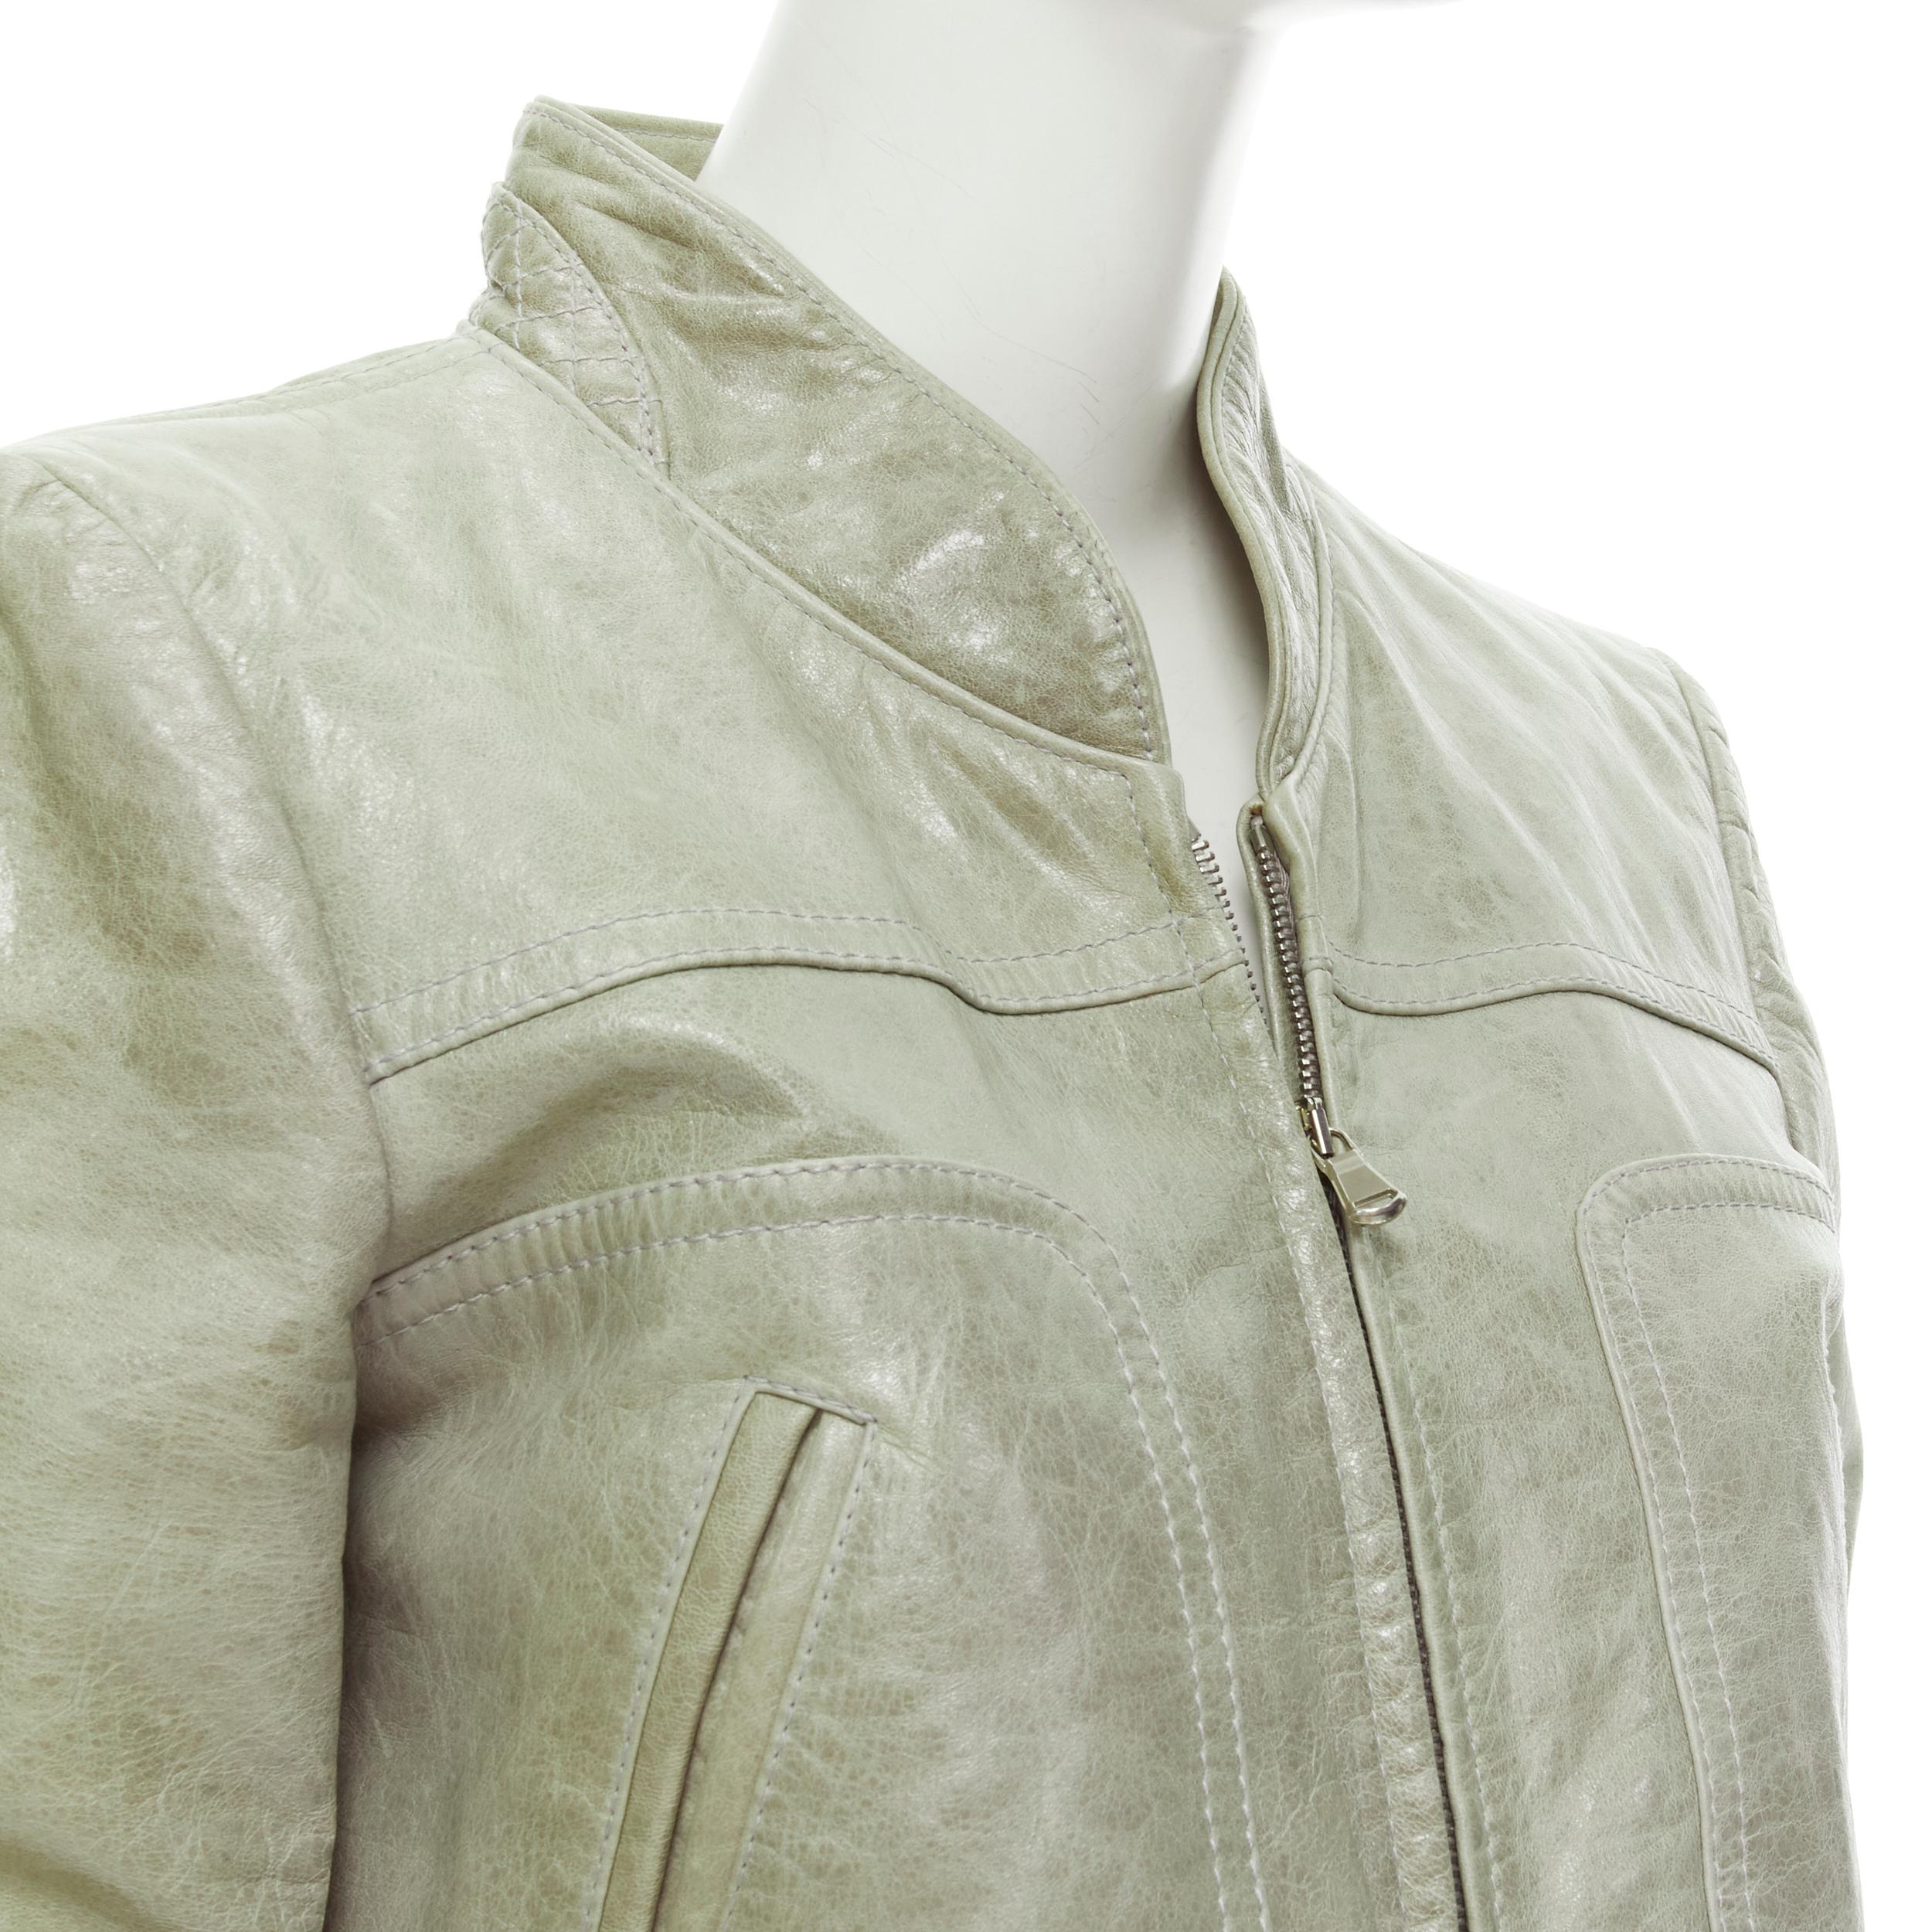 BALENCIAGA 2008 Vintage light grey Arena goat leather aviator bomber jacket IT38 
Reference: TGAS/C01081 
Brand: Balenciaga 
Designer: Nicolas Ghesquiere 
Material: Leather 
Color: Grey 
Pattern: Solid 
Closure: Zip 
Extra Detail: Diamond quilting